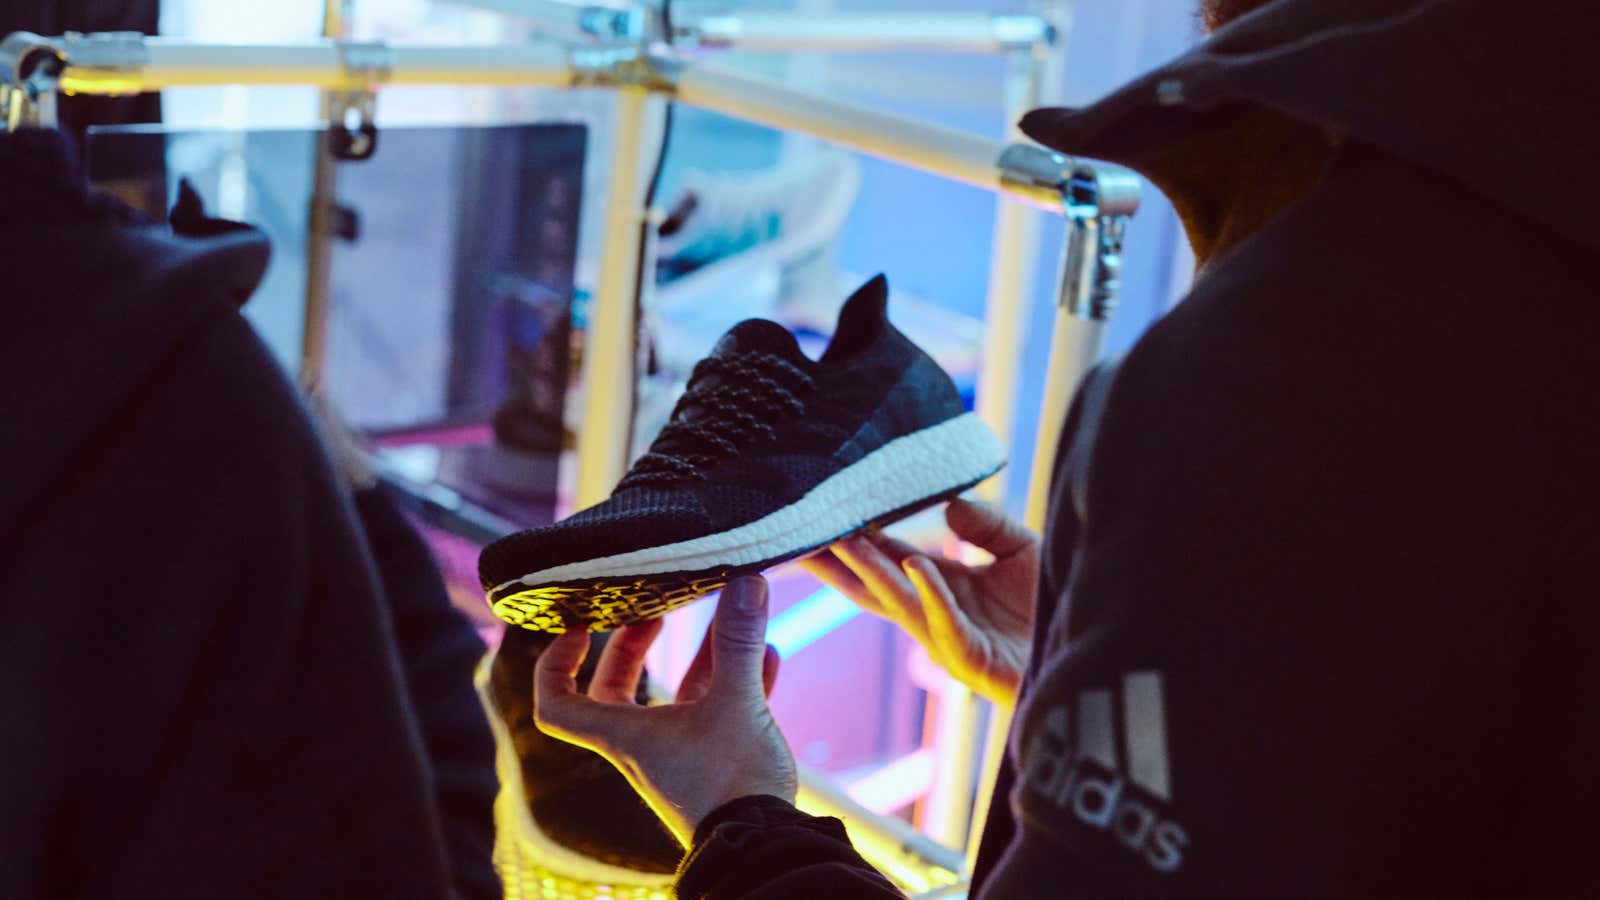 Adidas can already make shoes for specific cities. The next step is to do it for individuals.